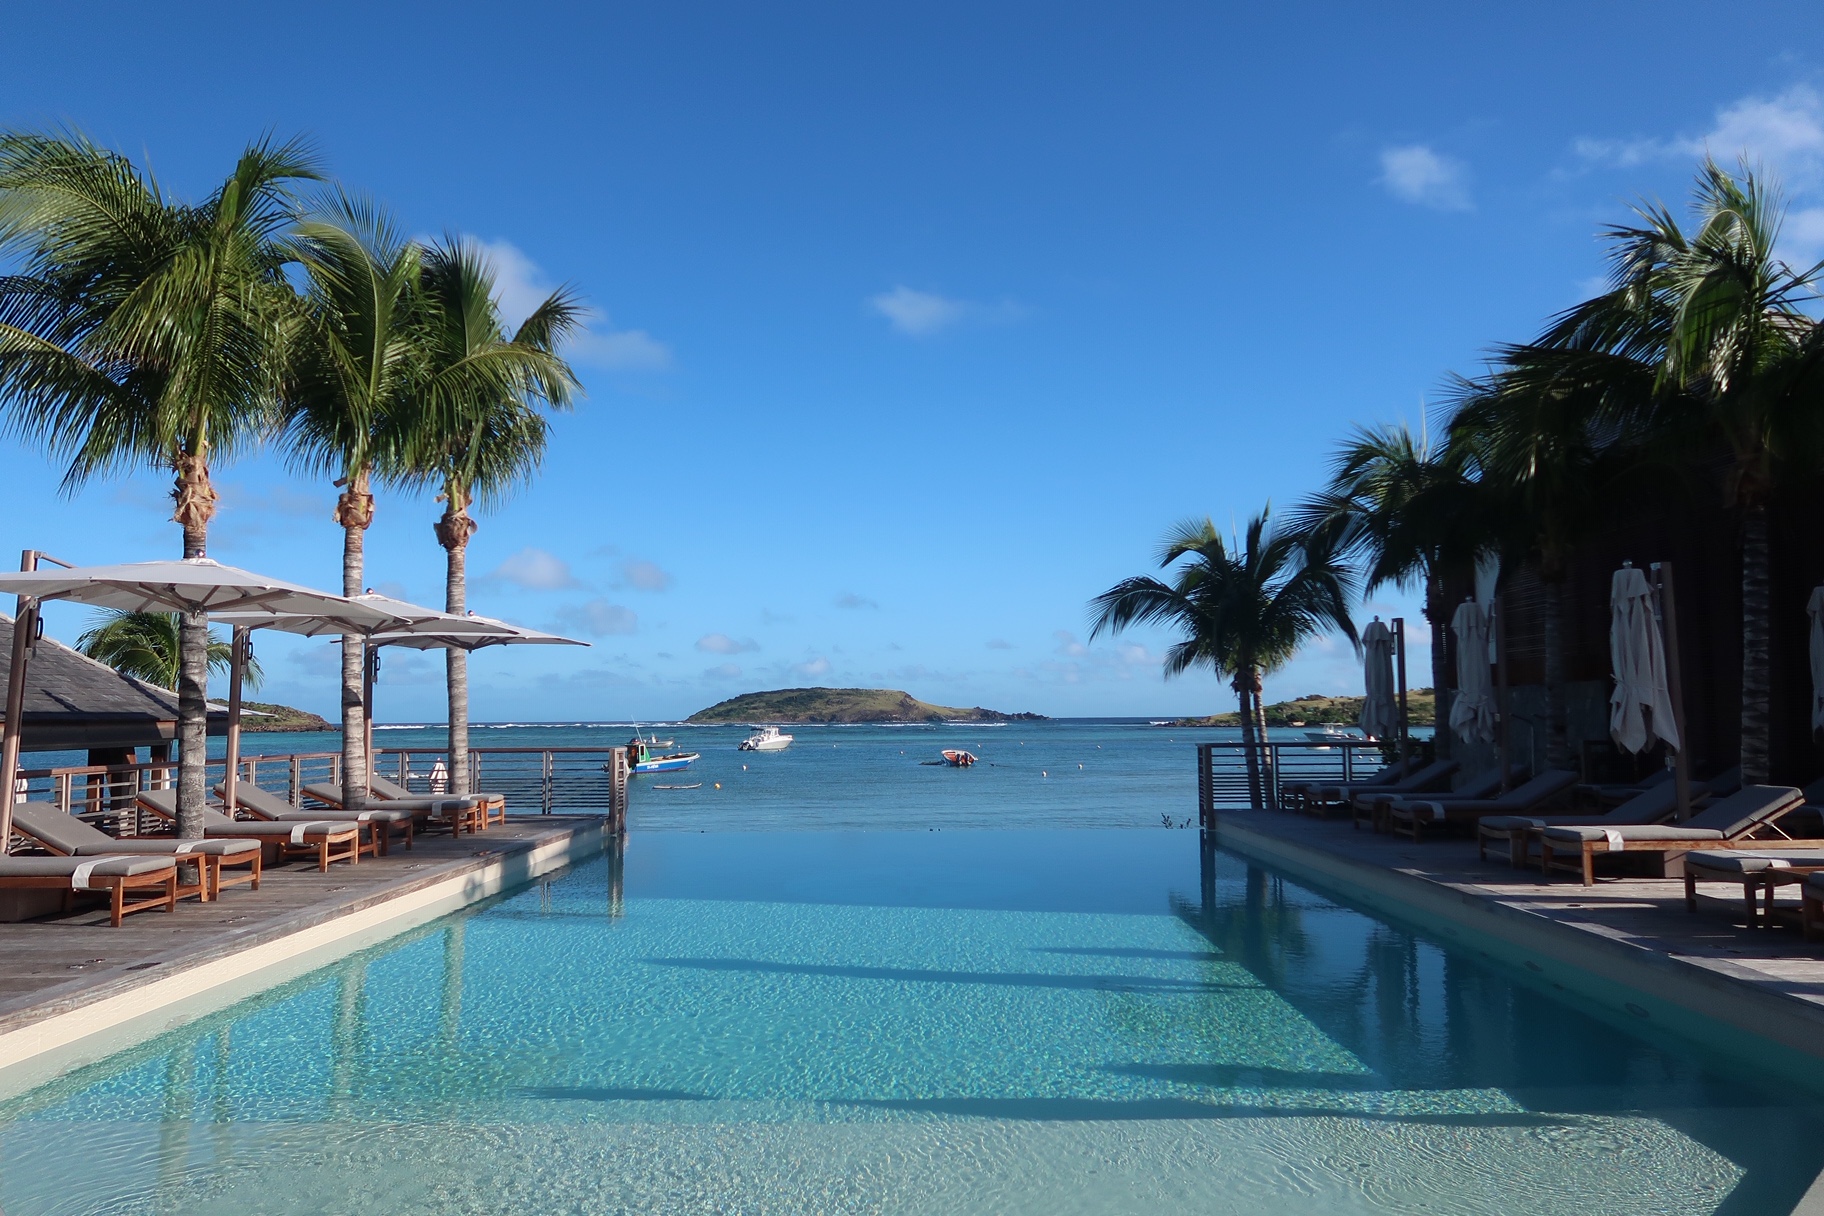 St. Barth's travel guide